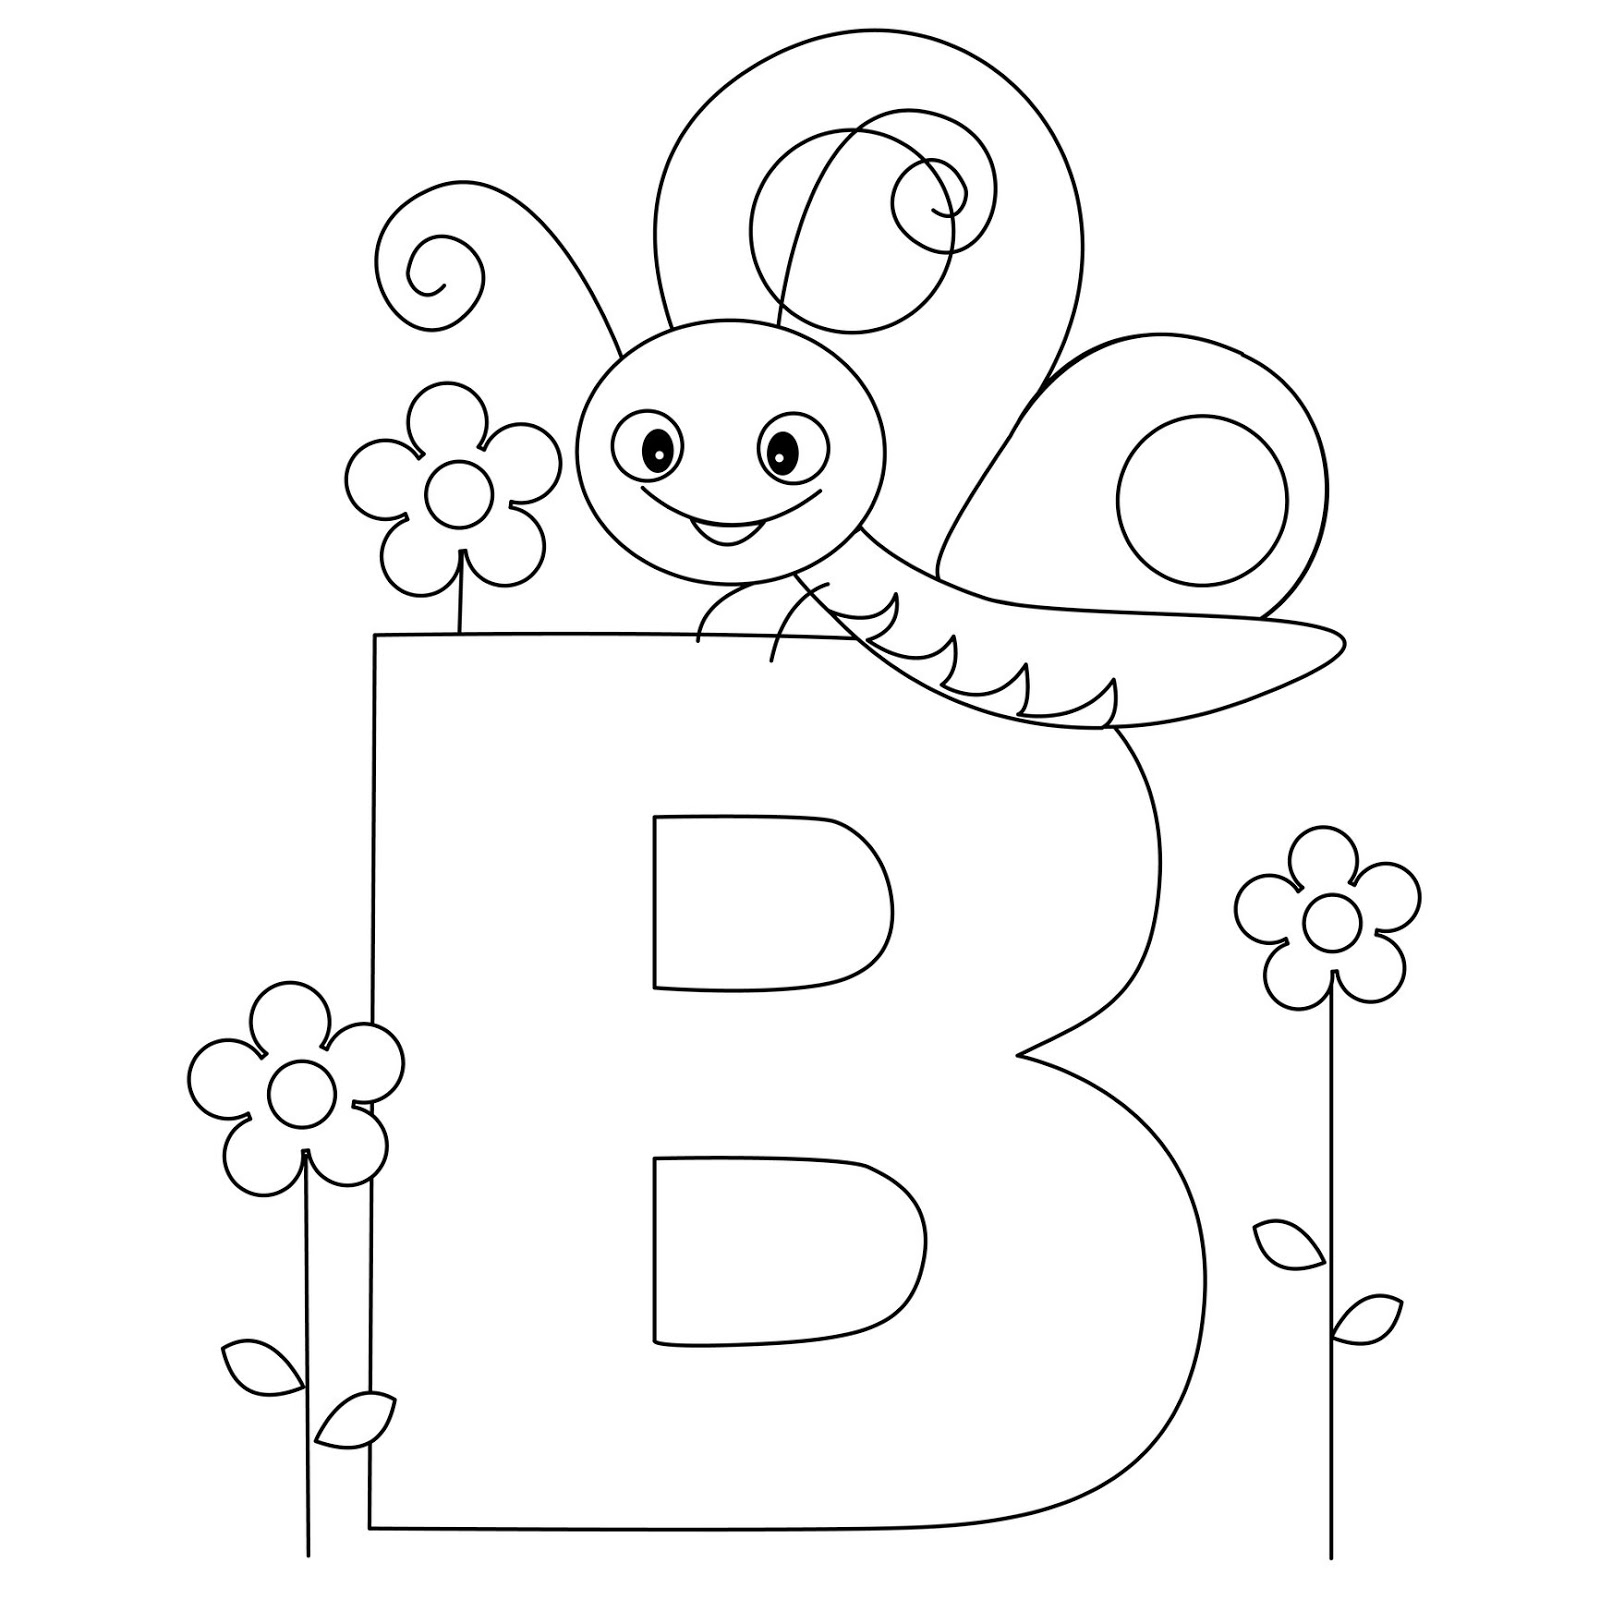 Excellent Alphabet Coloring Pages Free Printable Pdf Upin Ipin